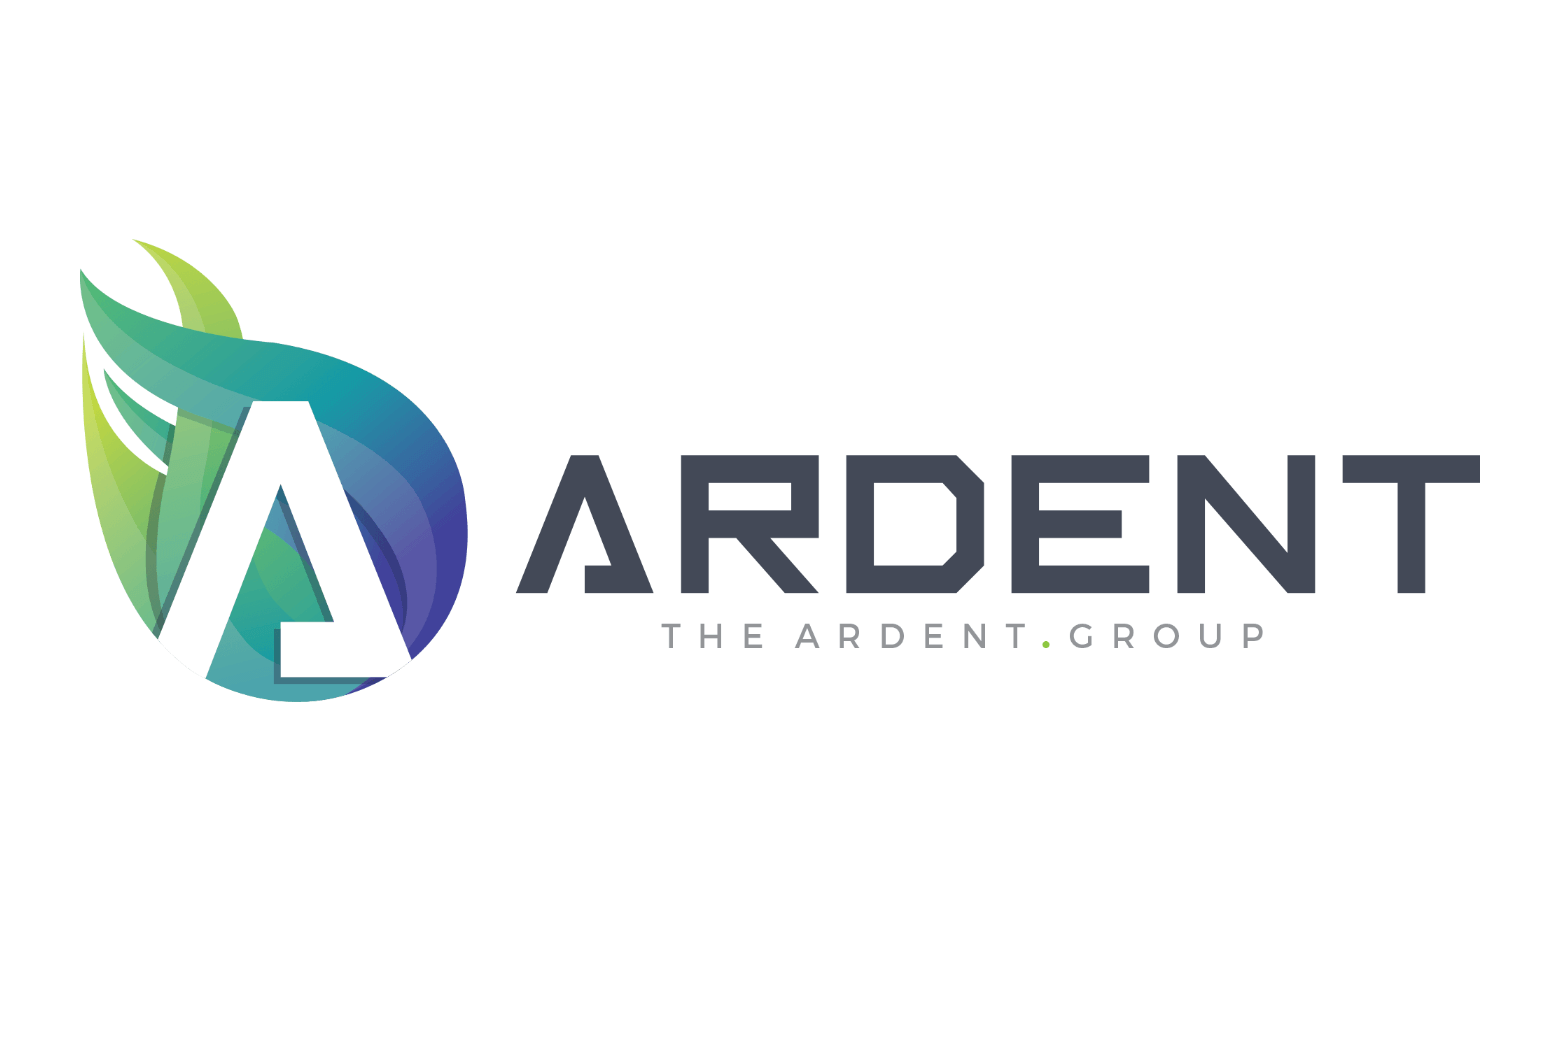 the ardent group